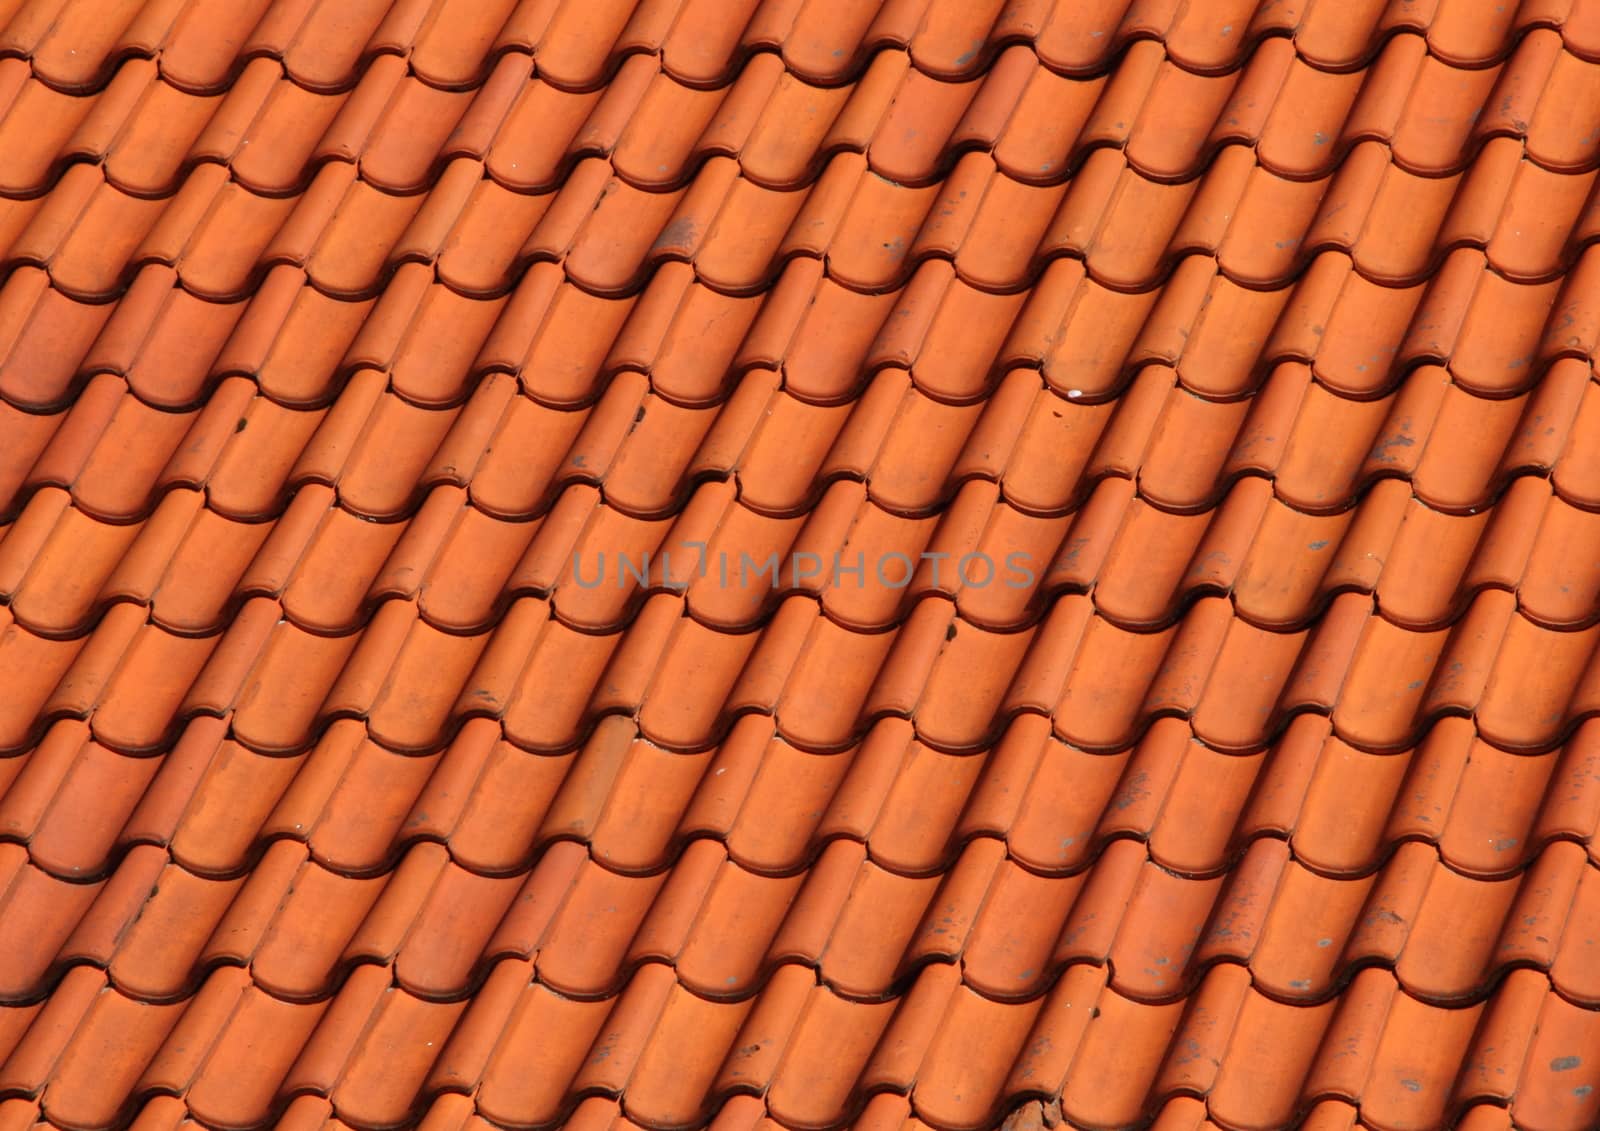 Red Clay Tile Roof on Old Farm House Background by HoleInTheBox